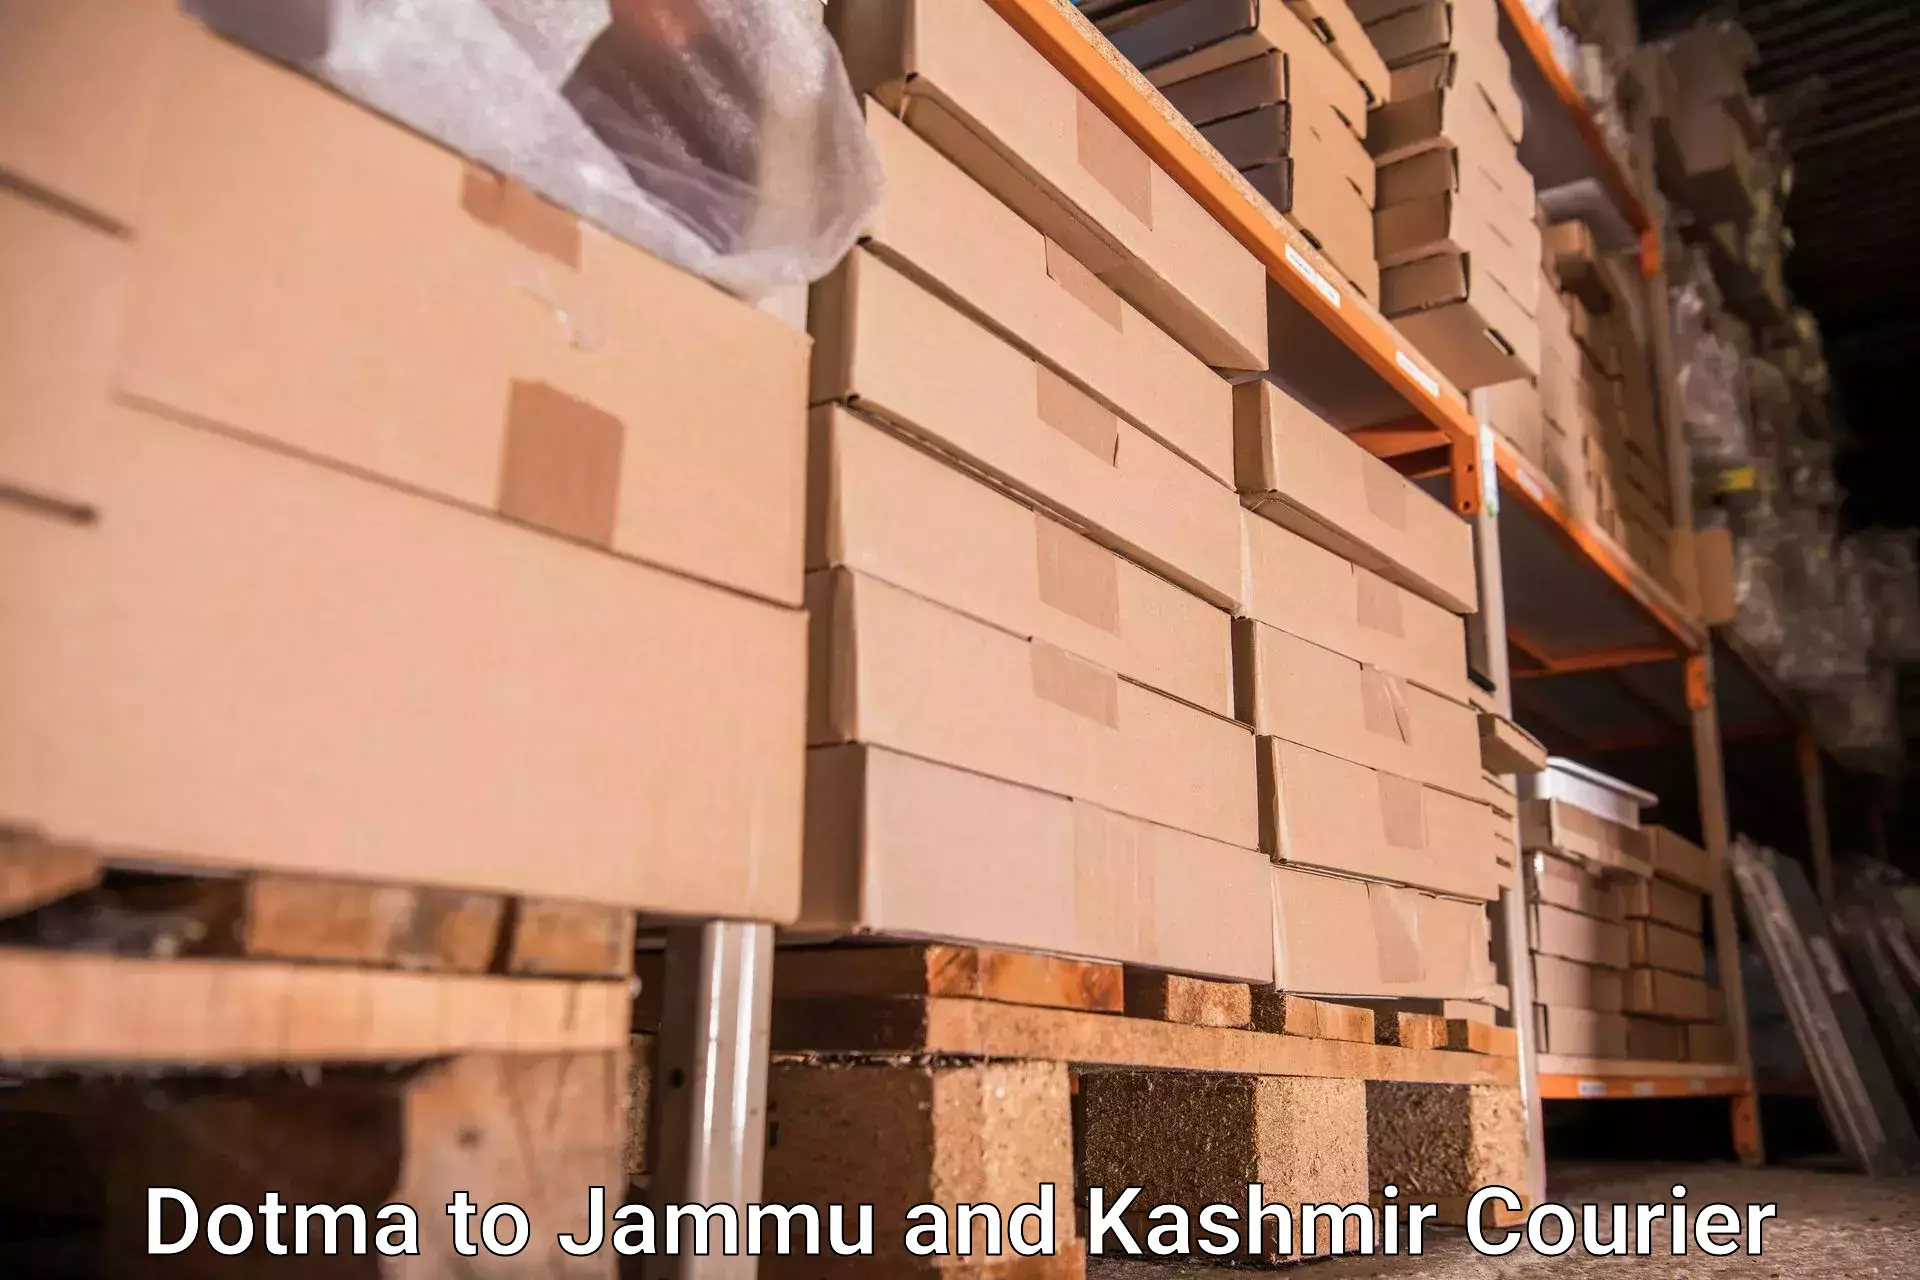 Personal effects shipping Dotma to Baramulla